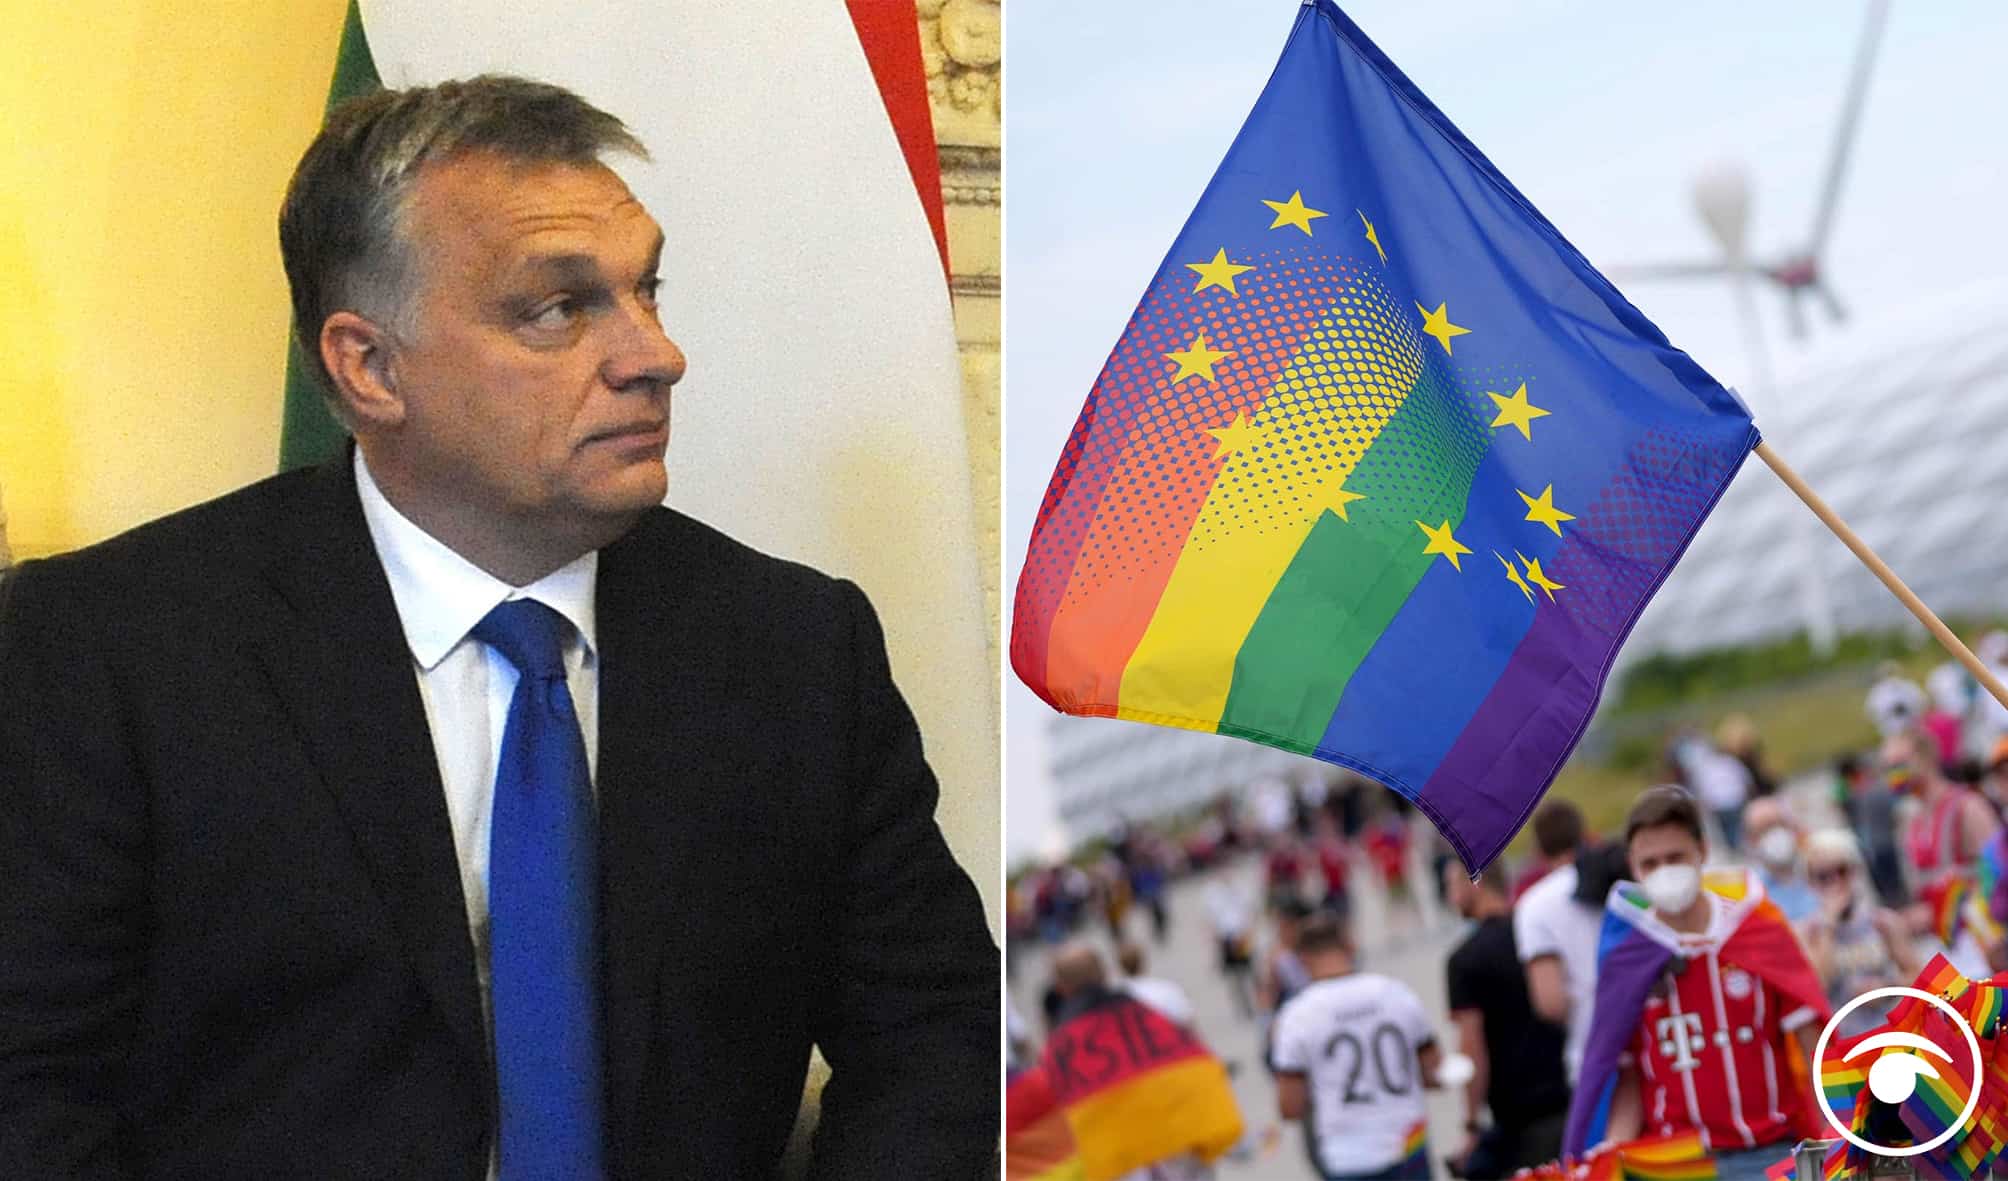 EU leaders sign open letter putting pressure on Hungary to drop ‘discriminatory’ LGBTQ+ laws